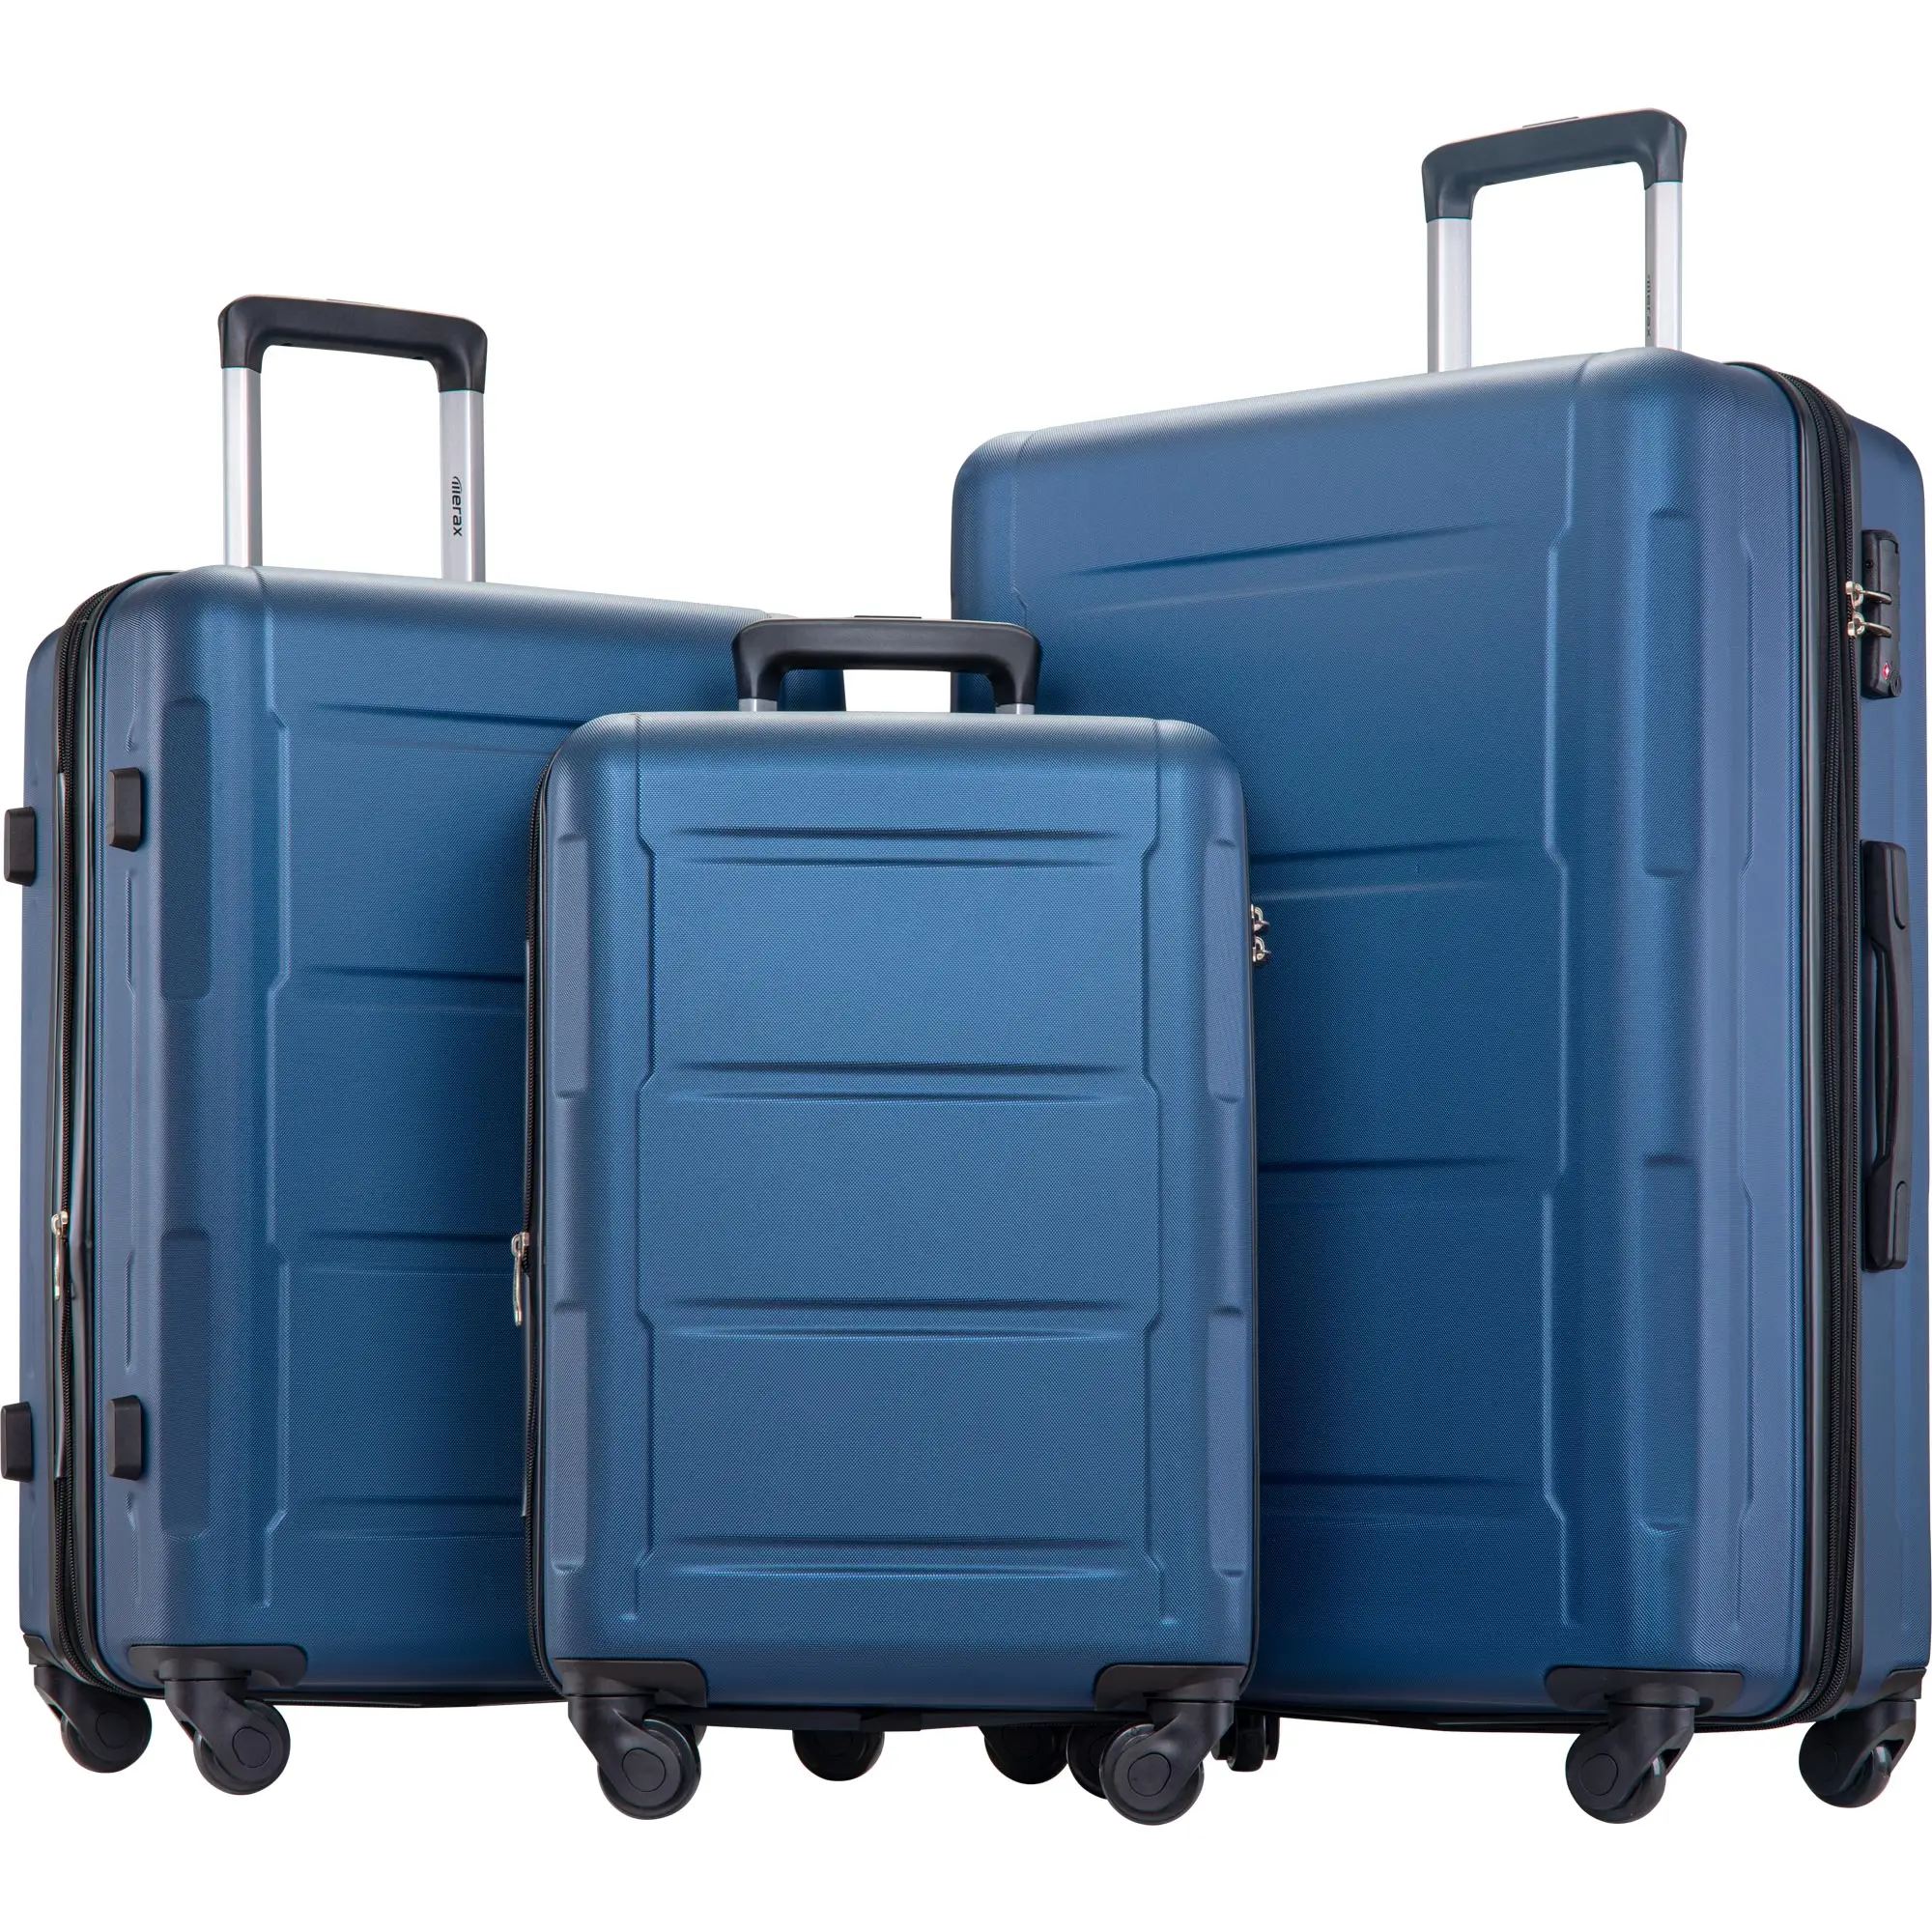 

Expanable Spinner Wheel 3 Piece Luggage Set ABS Lightweight Suitcase with TSA Lock, Blue